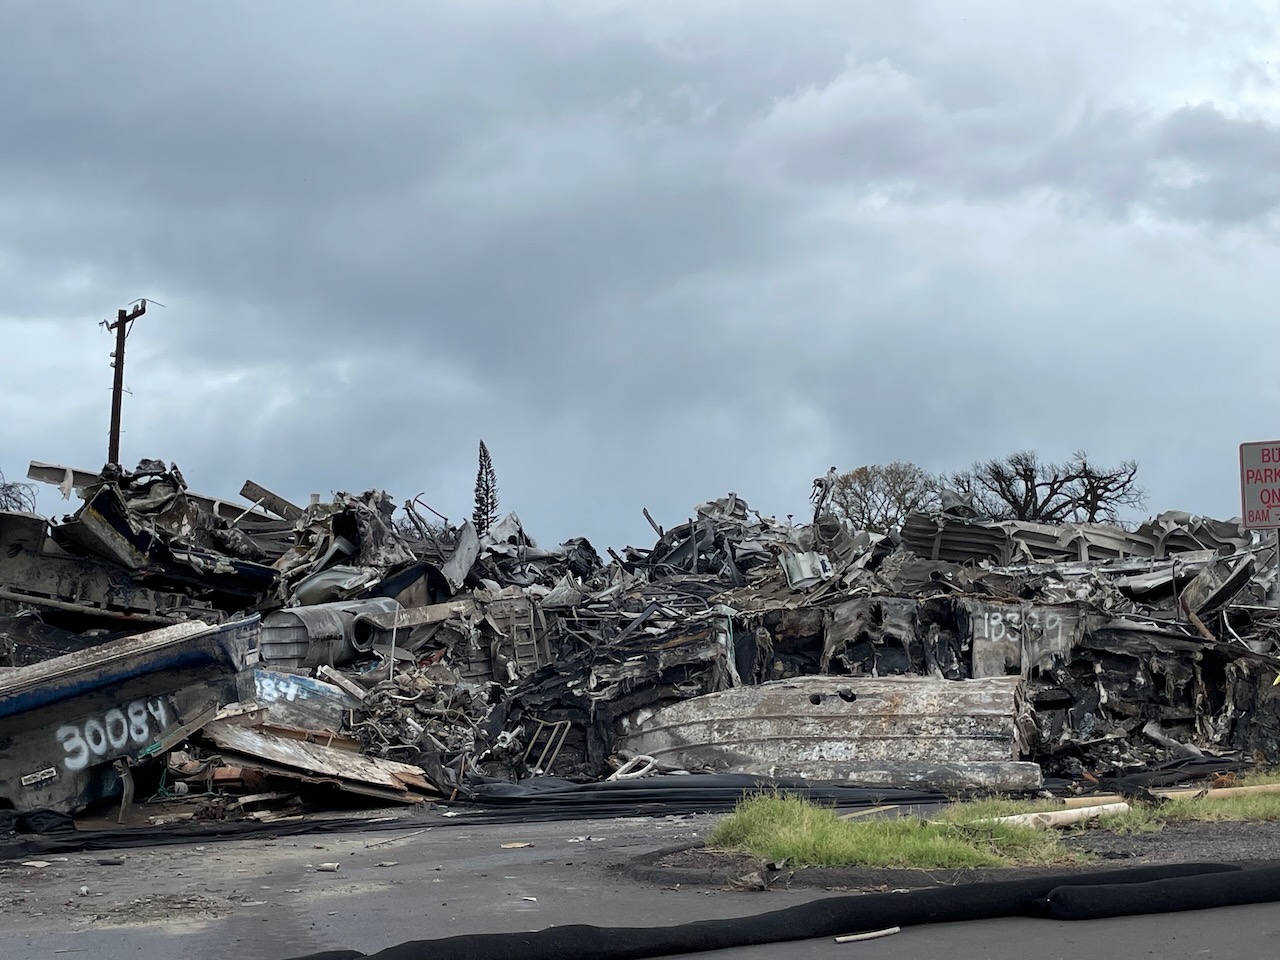 Burned and damaged vessels removed from Lahaina Harbor at the disposition lot in Lahaina, Maui. Image credit: NOAA/Ruth Yender 